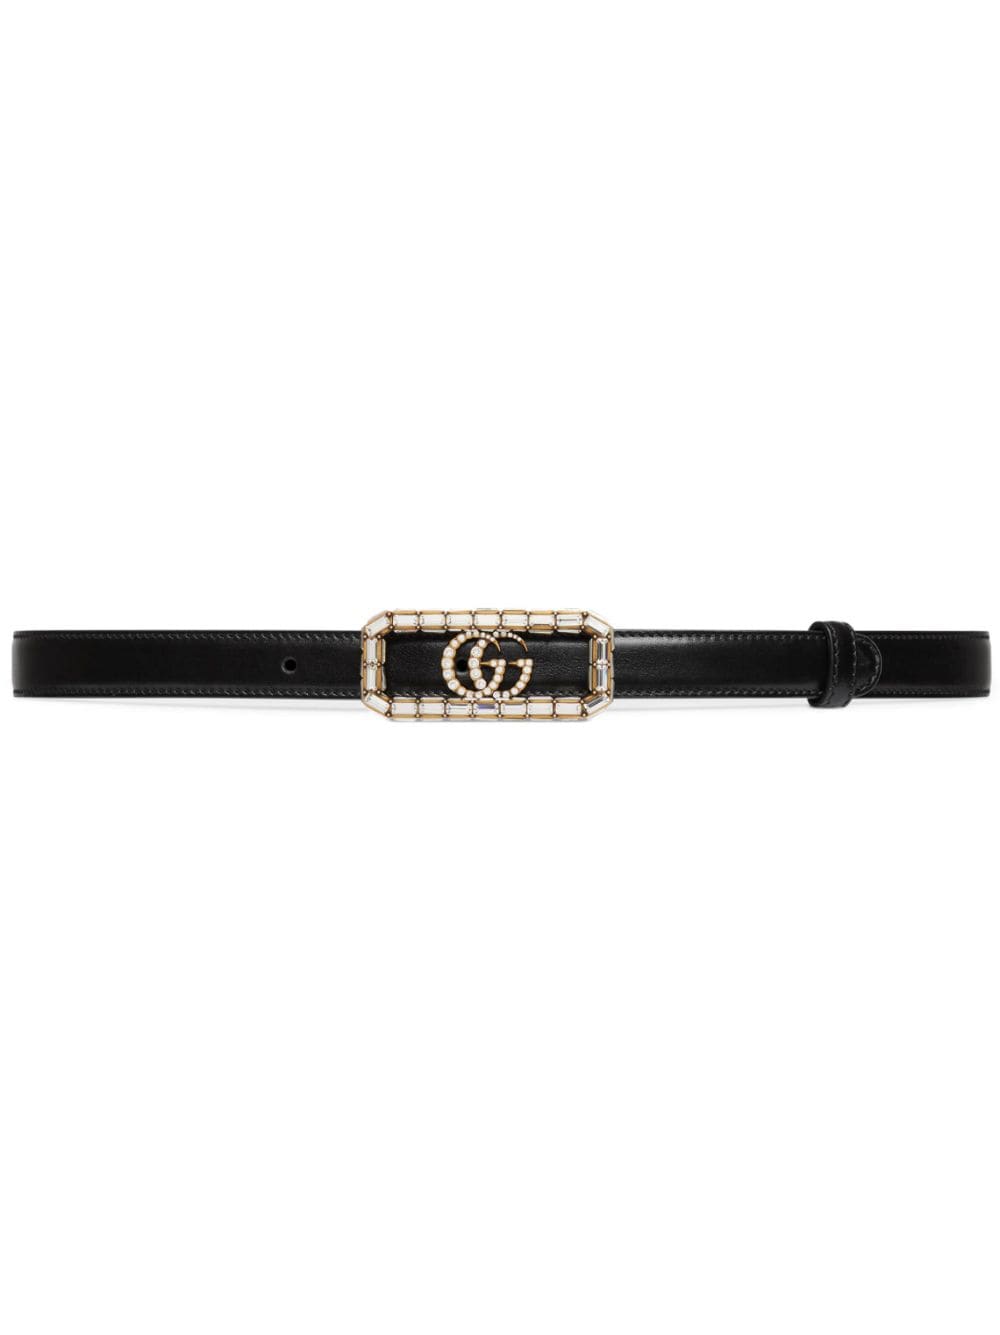 GUCCI Luxurious Black Leather Belt with Crystal-Embellished Double G Logo Buckle